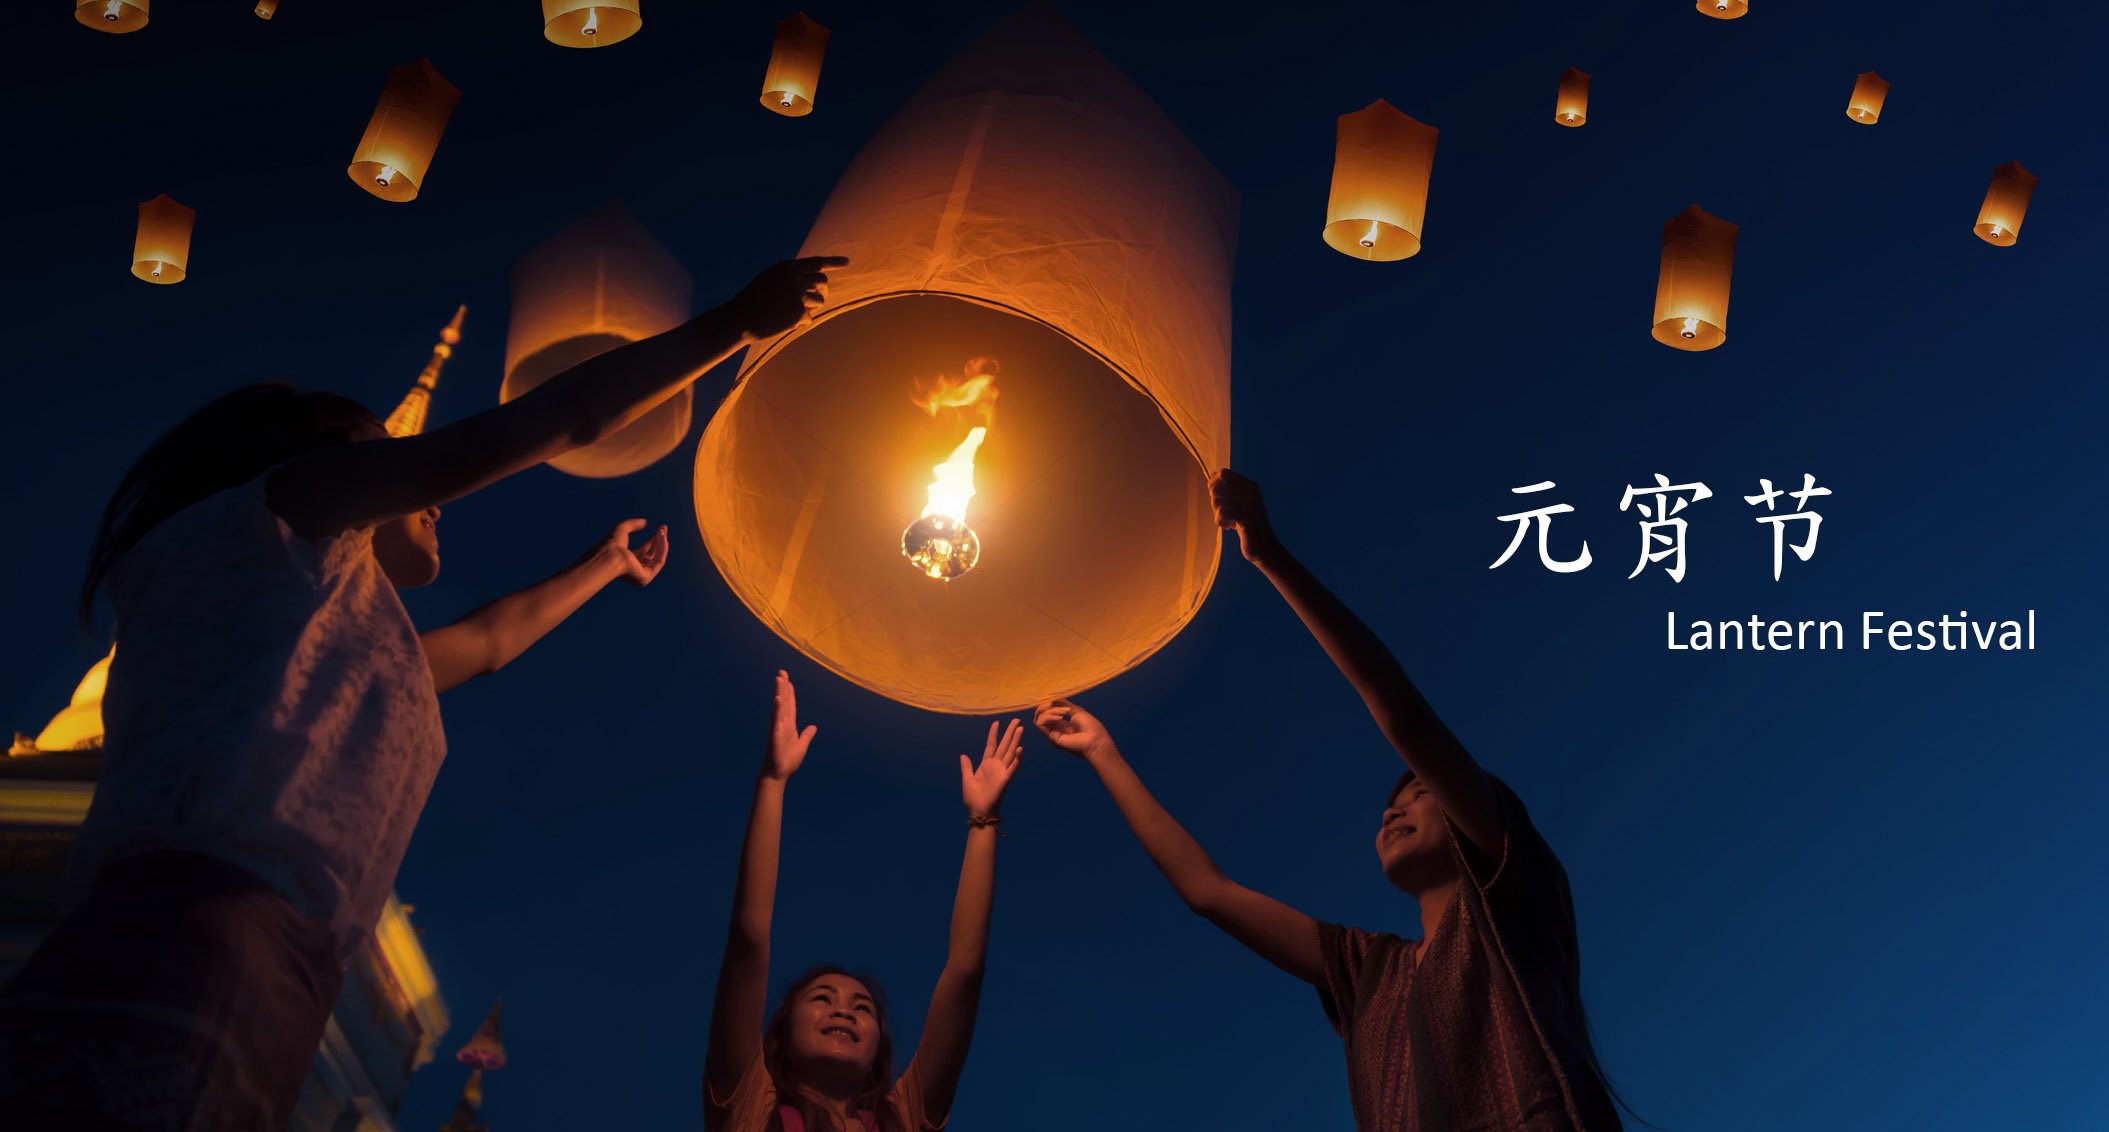 China's Lantern Festival, an important celebration in the Chinese calendar